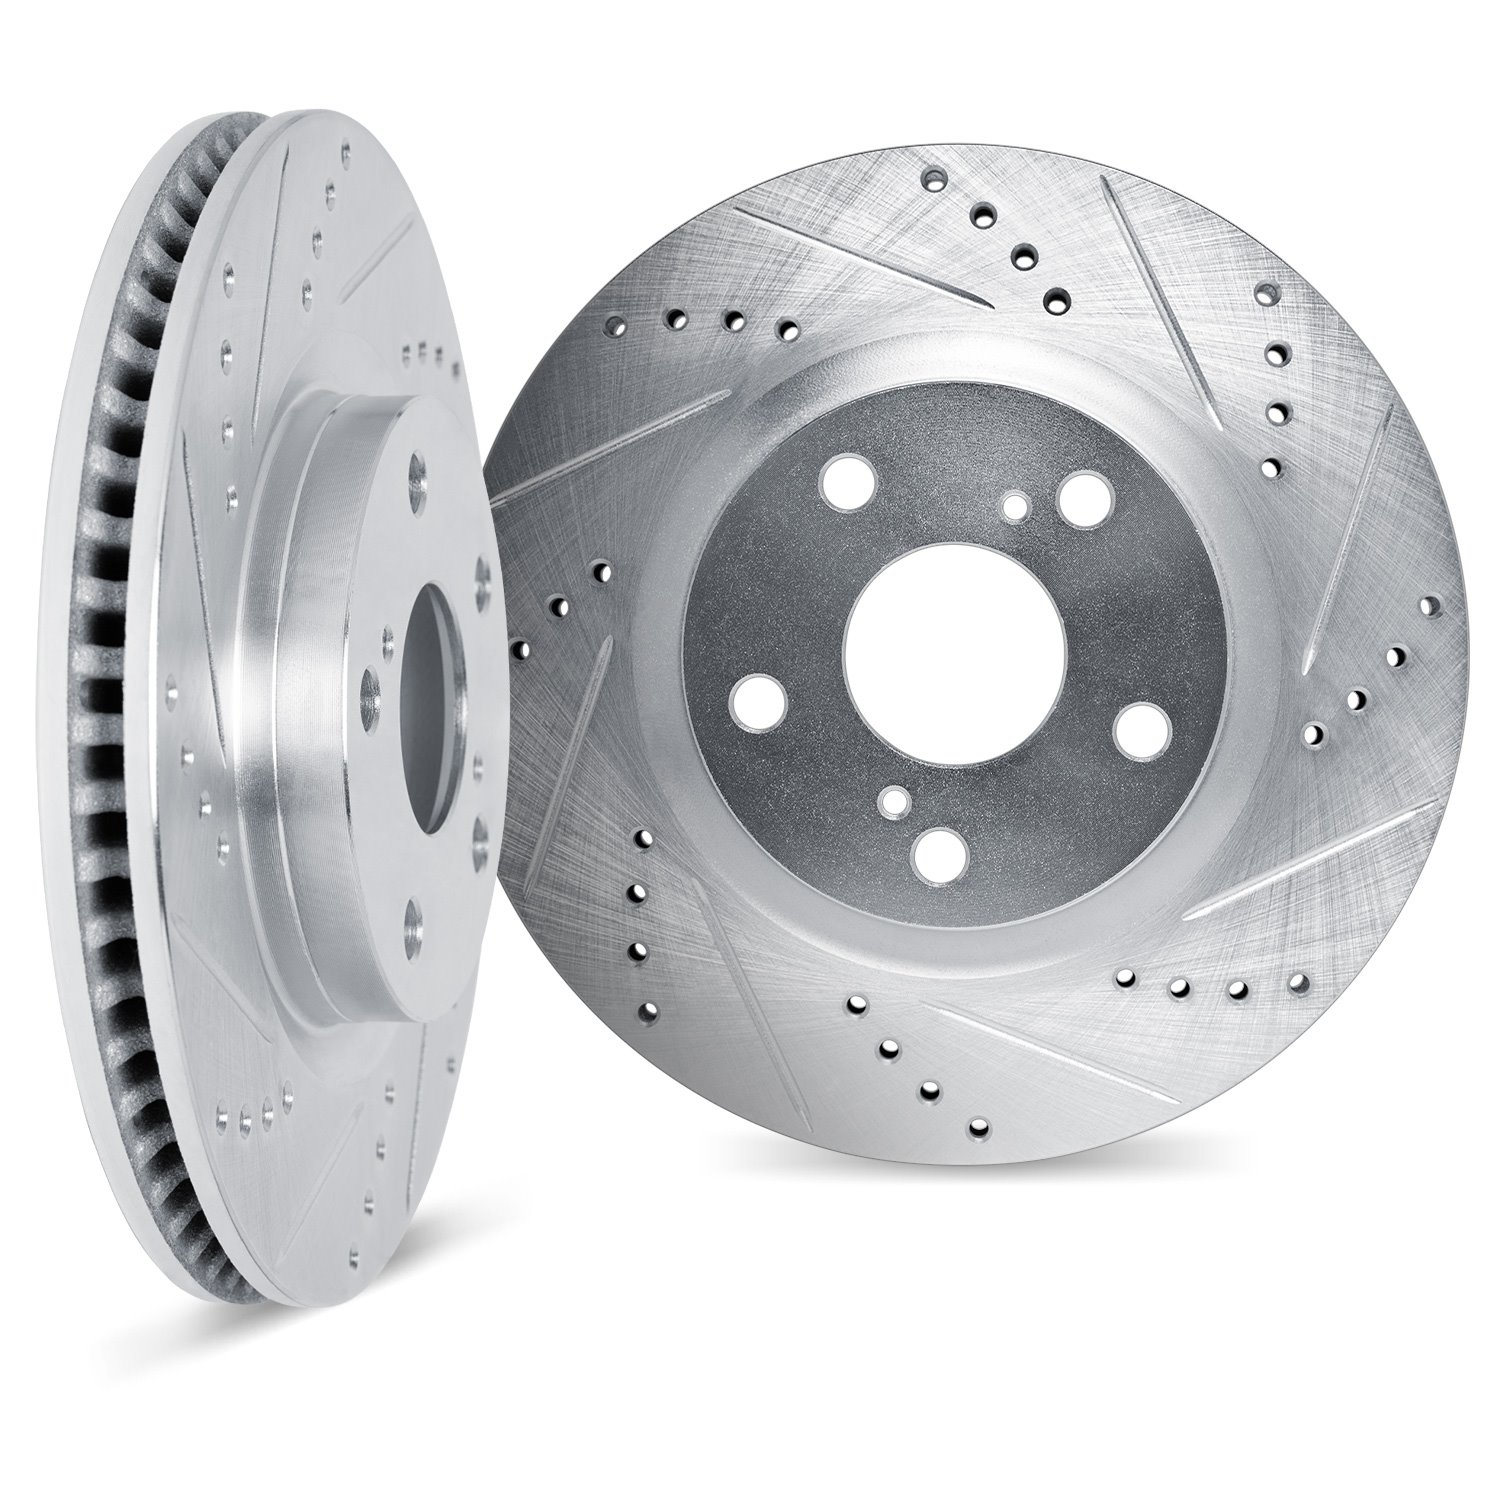 7002-76144 Drilled/Slotted Brake Rotors [Silver], 1992-1995 Lexus/Toyota/Scion, Position: Rear